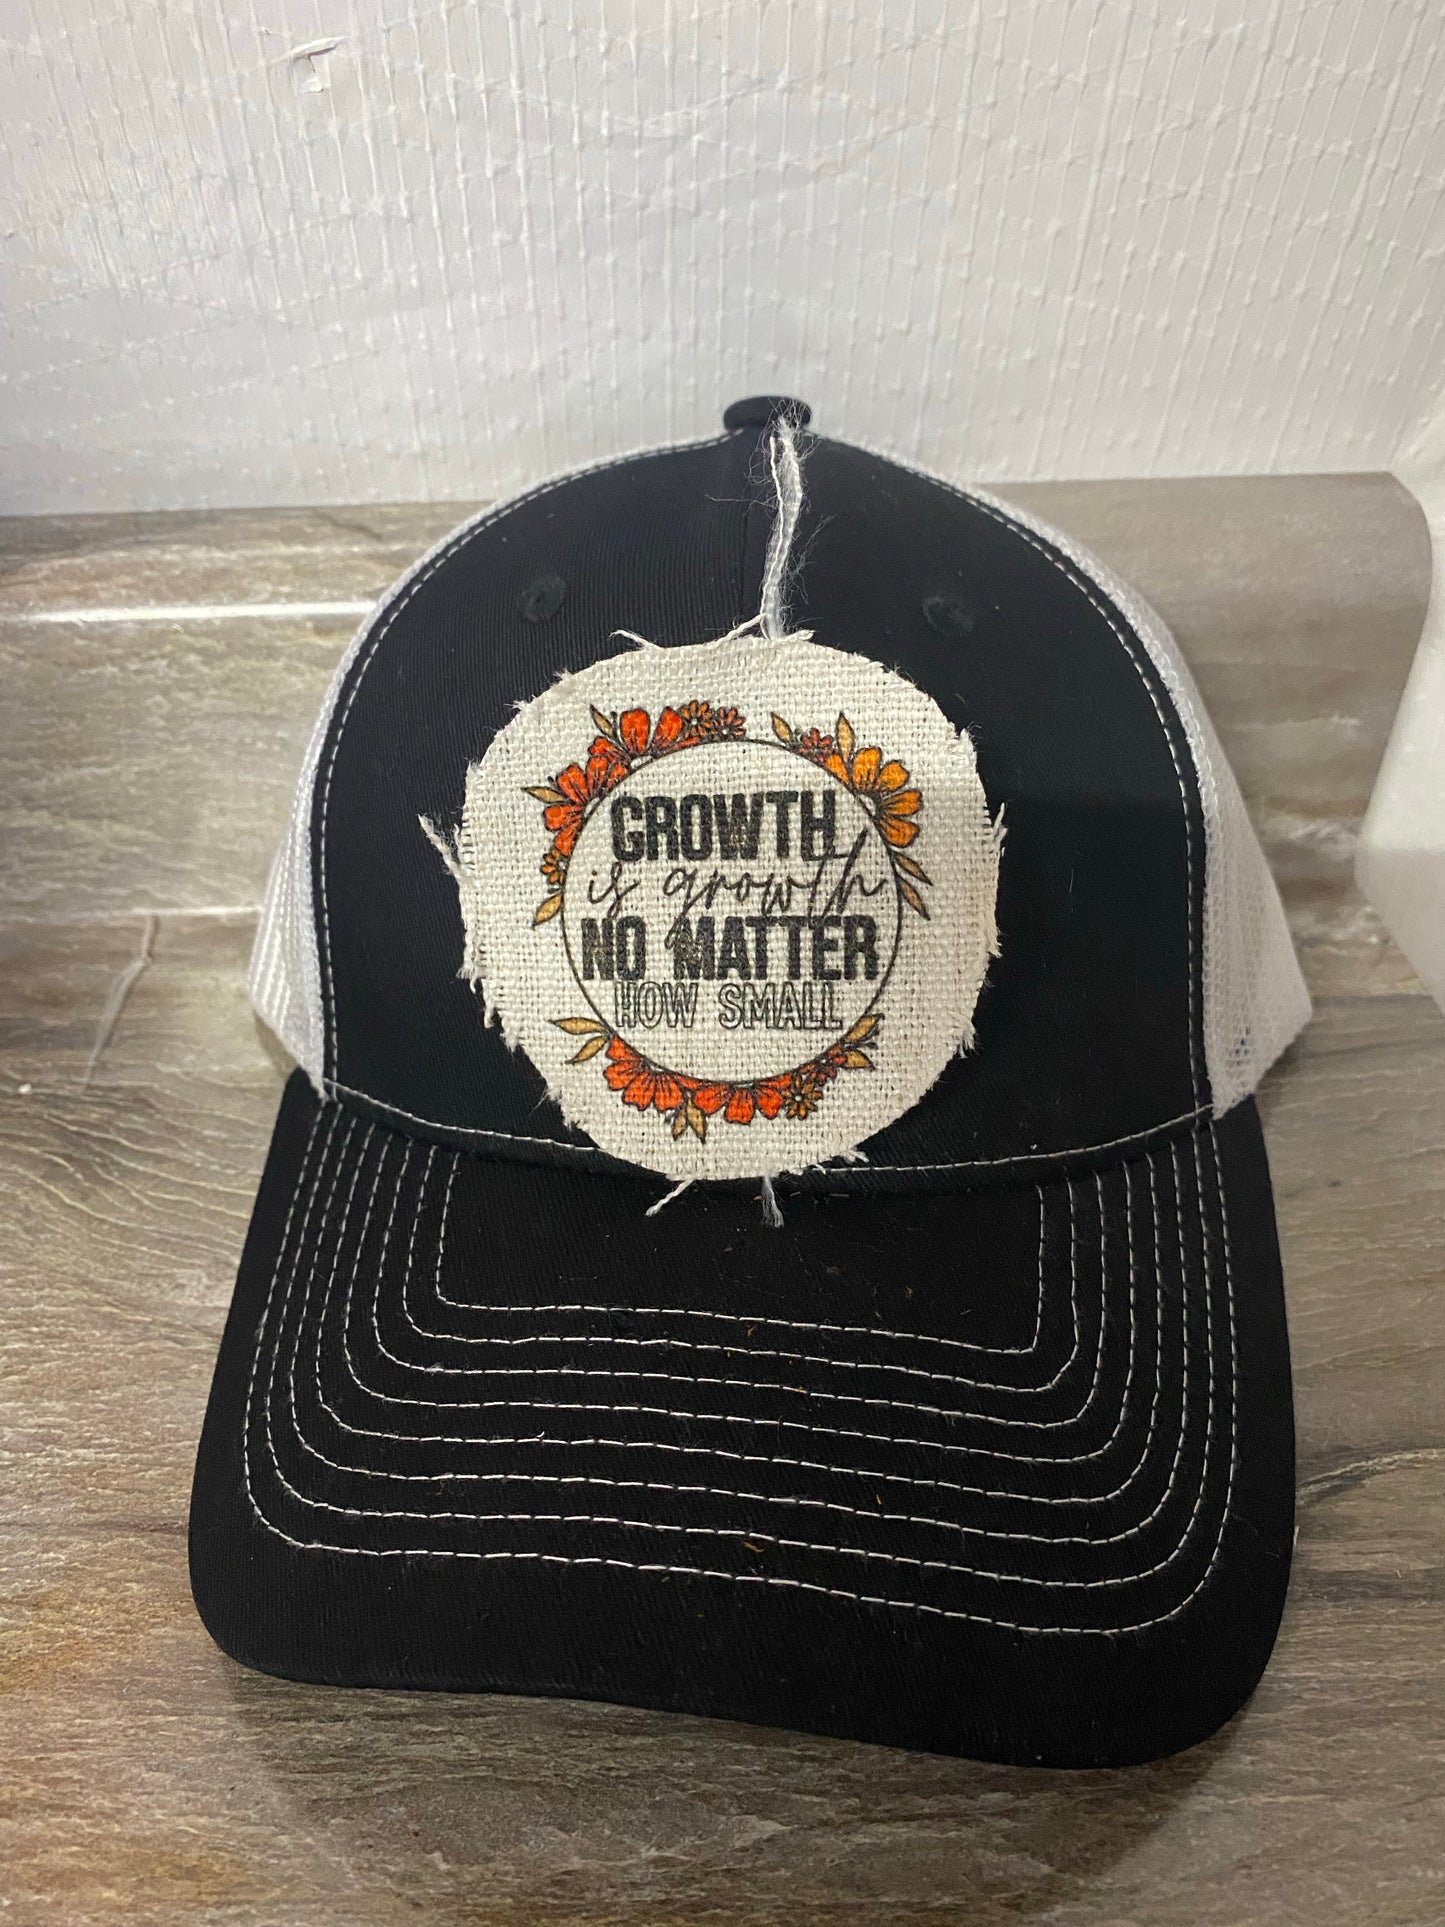 Growth Is Growth Hat Patch